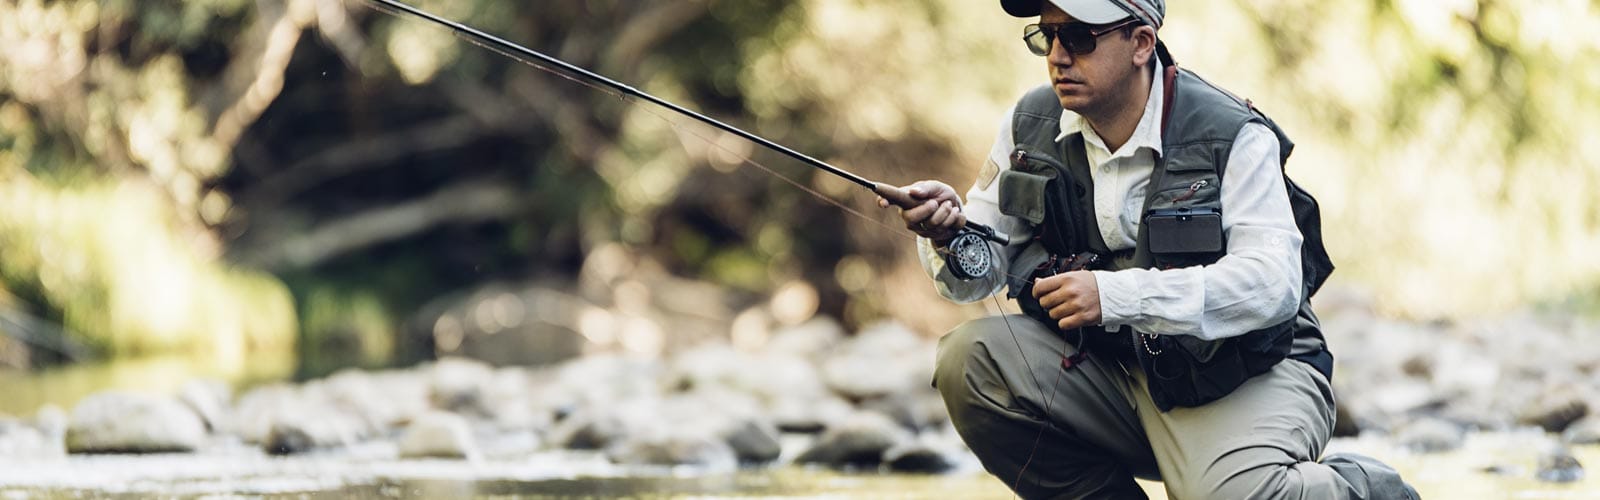 How to Choose a Fly Fishing Rod: Sierra